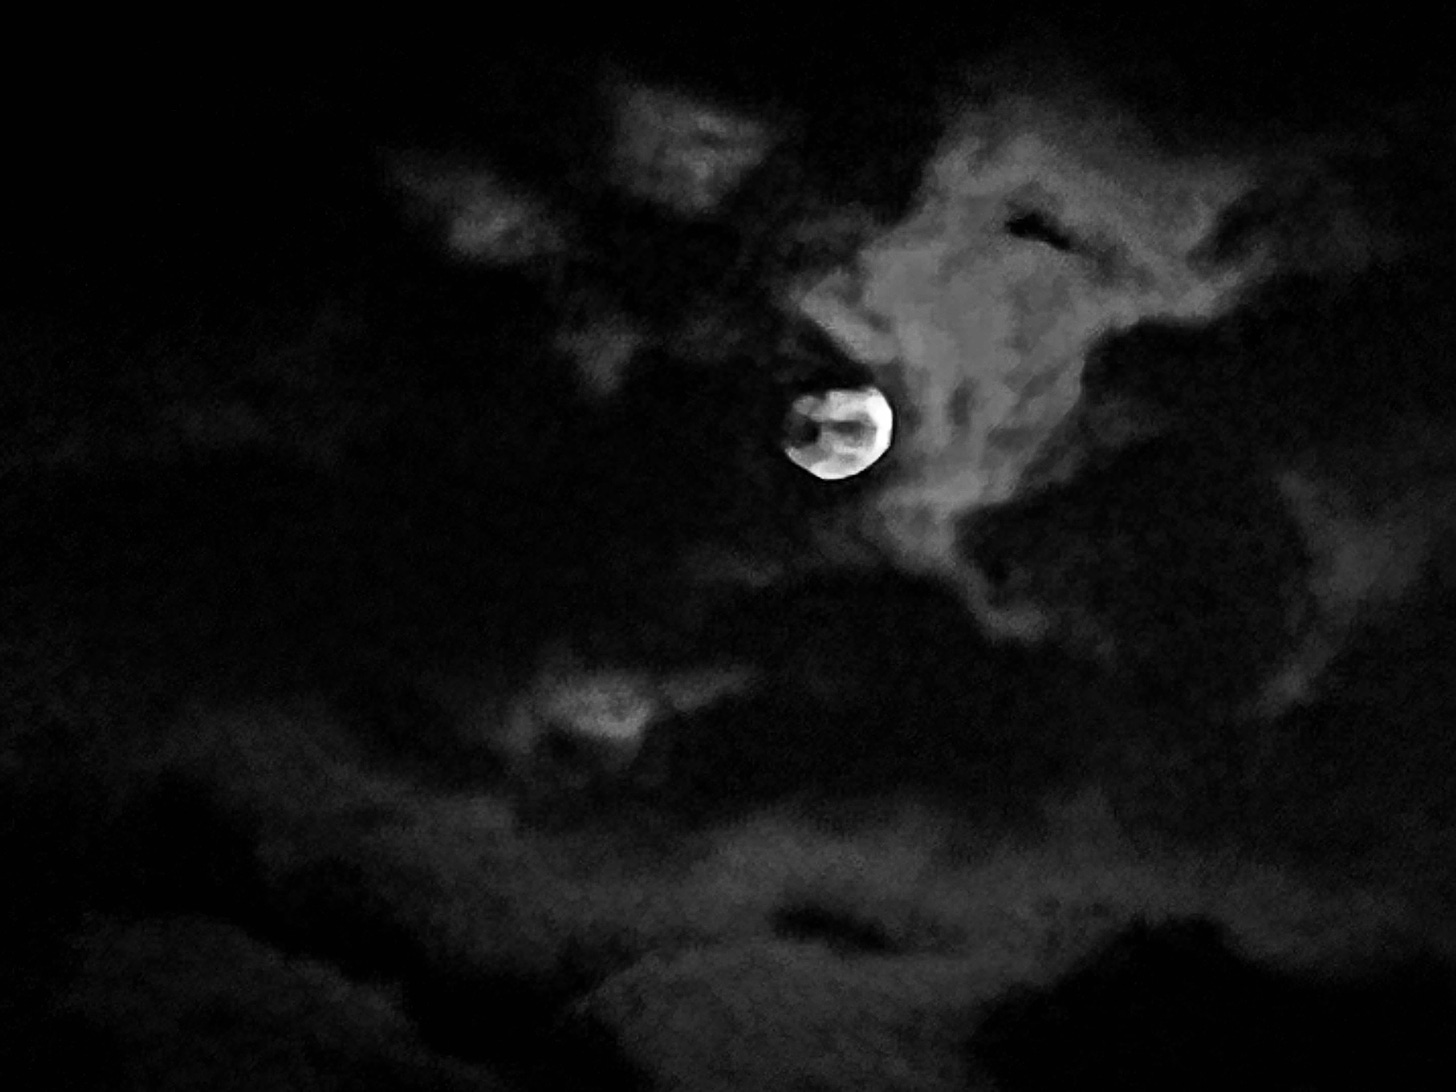 A moon shining brightly in the dark night sky, partly obscured by wispy clouds stretching across it and the night sky.